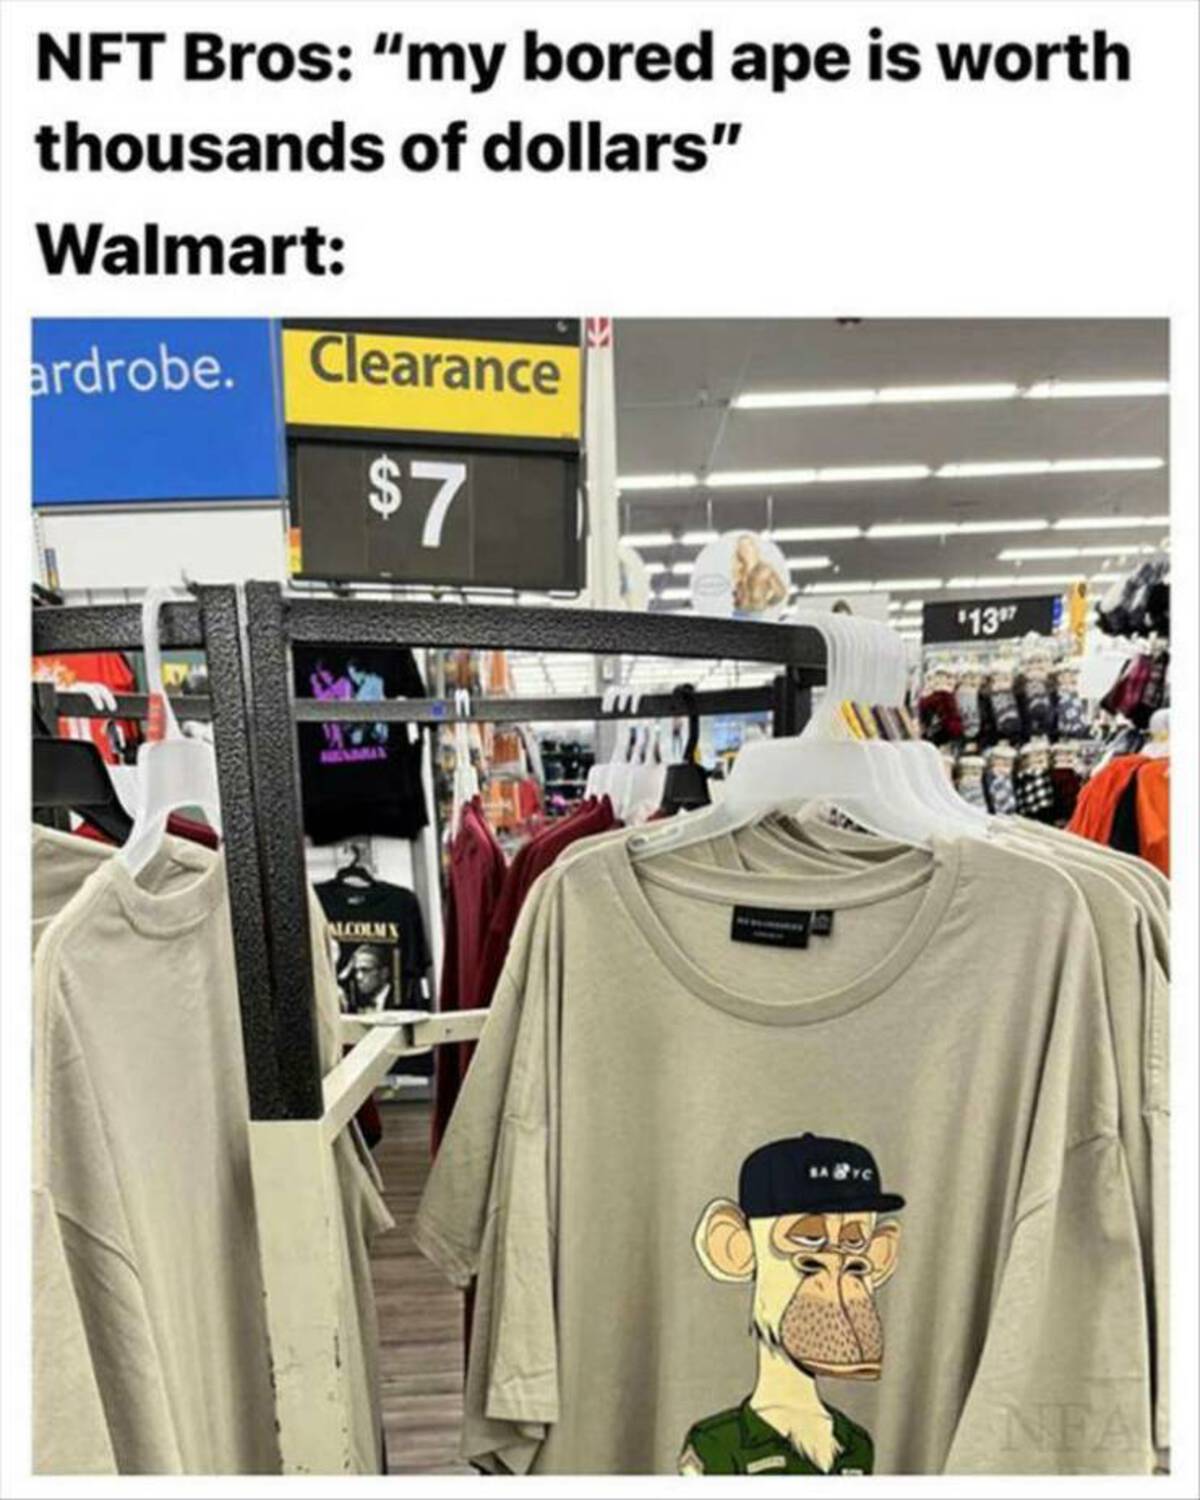 t shirt - Nft Bros "my bored ape is worth thousands of dollars" Walmart ardrobe. Clearance $7 Alcolmx & re $137